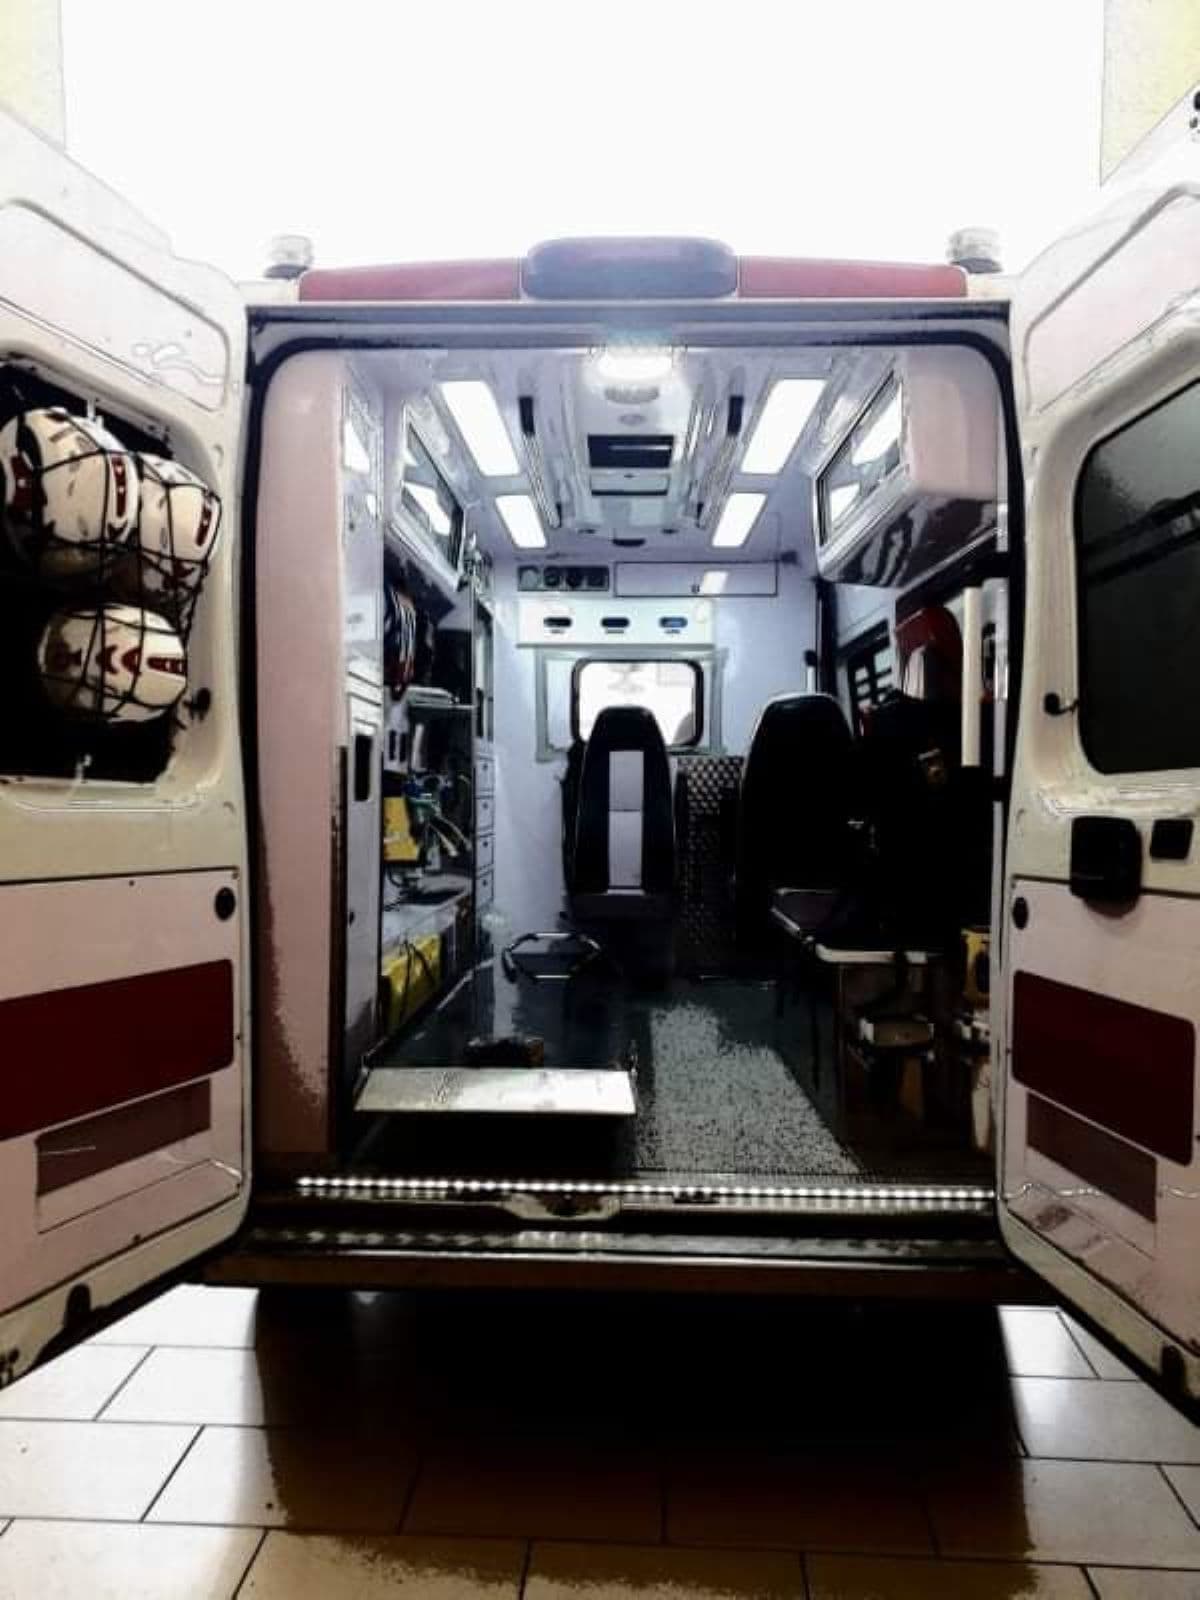 Angera, incidente in piazza Cavour